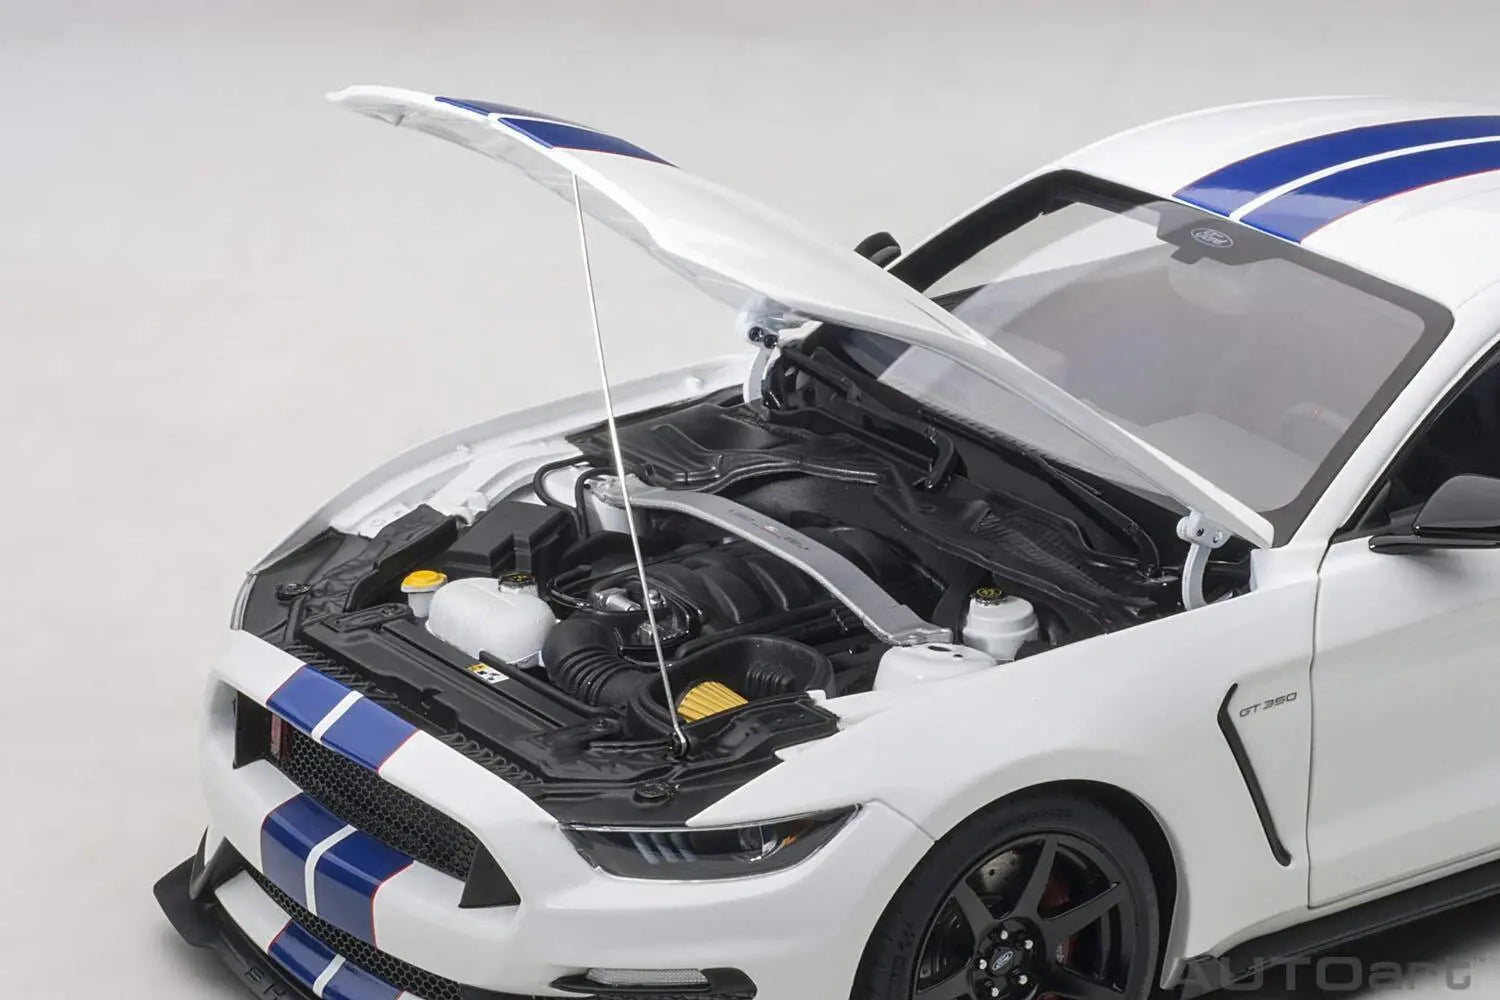 Mustang Shelby GT-350R - Perfect Diecast